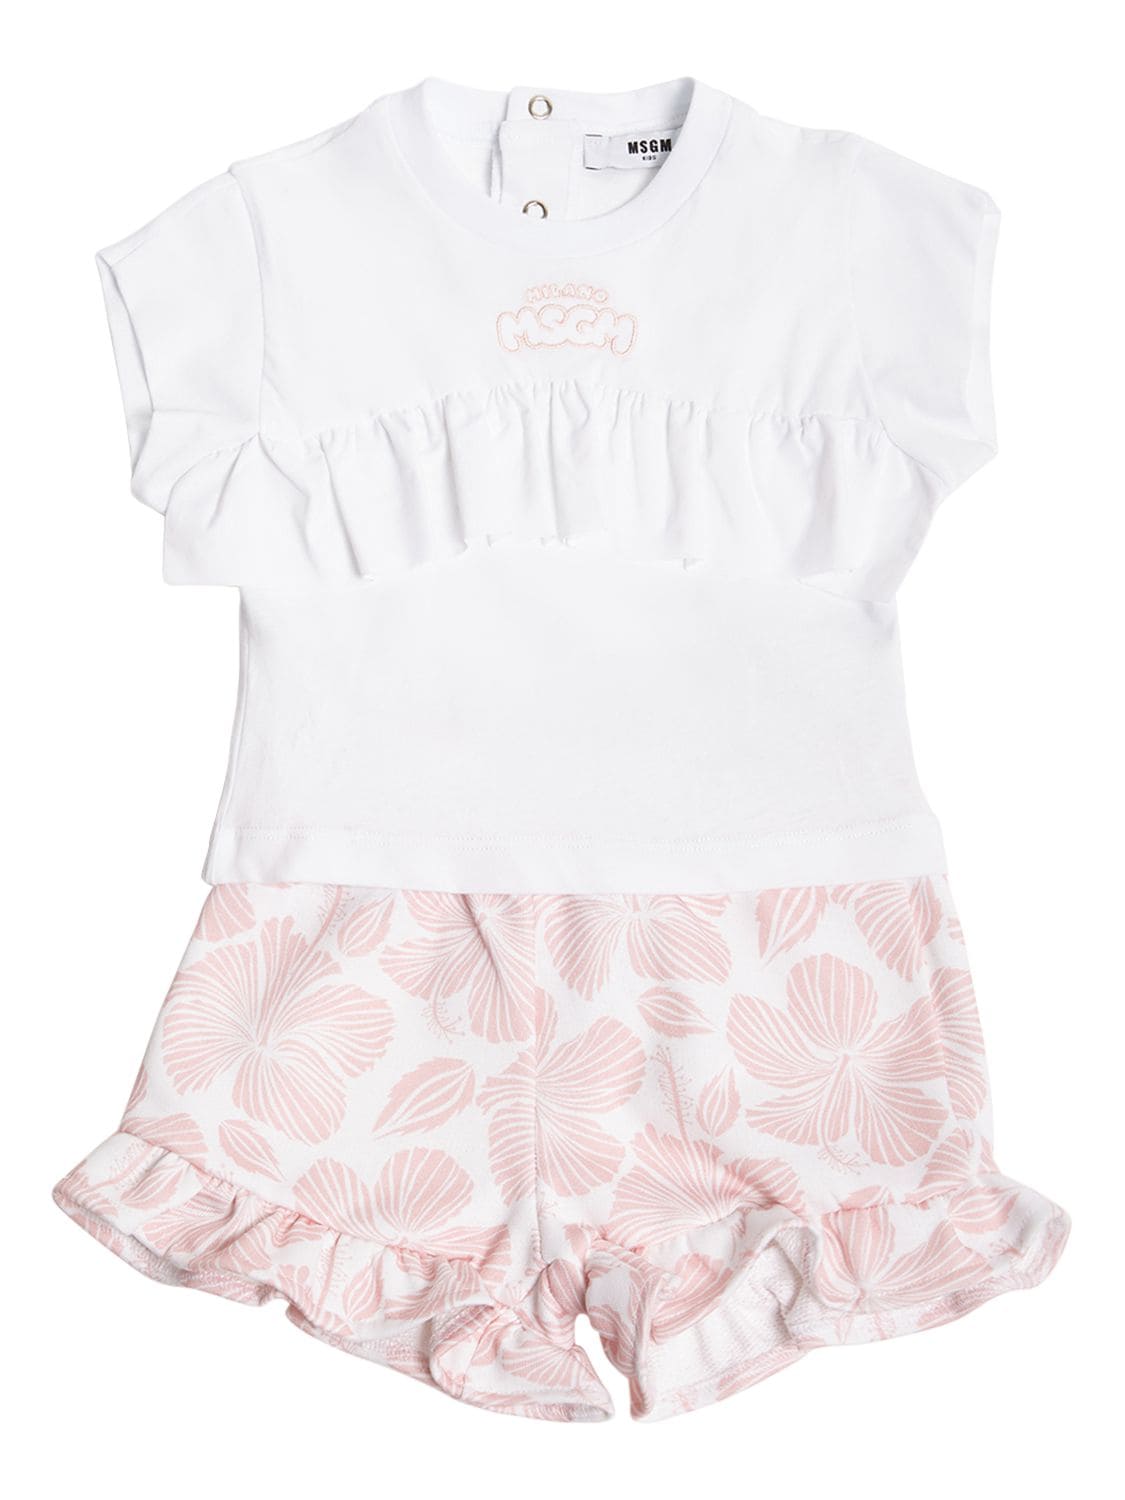 Msgm Kids' Cotton Jersey T-shirt & Shorts In Pink,white